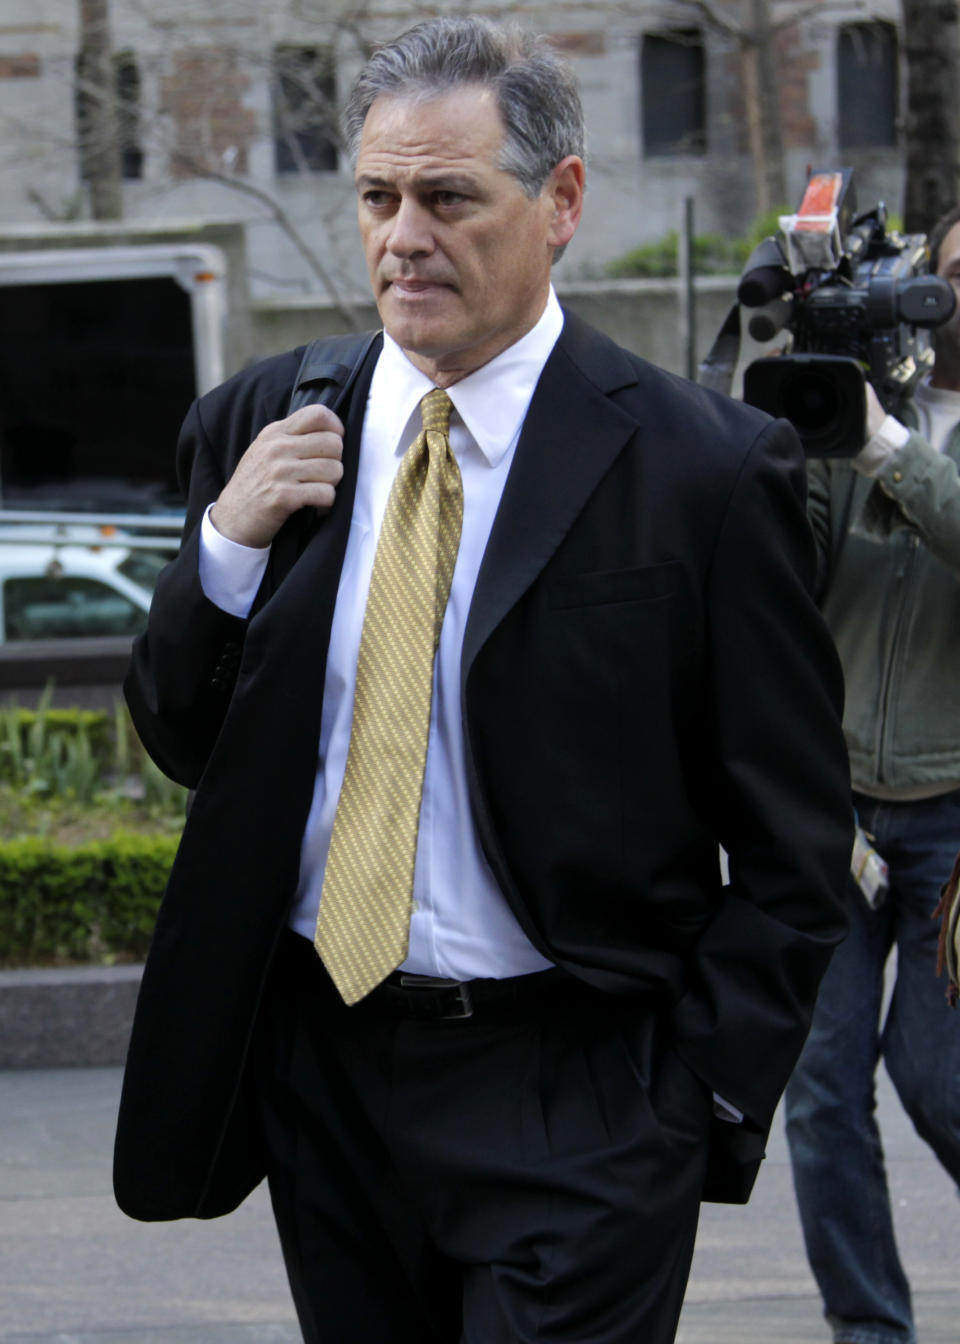 New Orleans Saints' general manager Mickey Loomis arrives for a meeting at NFL headquarters in New York, Thursday, April 5, 2012. Loomis and assistant coach Joe Vitt arrived to appeal their suspensions in the New Orleans bounty case. (AP Photo/Seth Wenig)